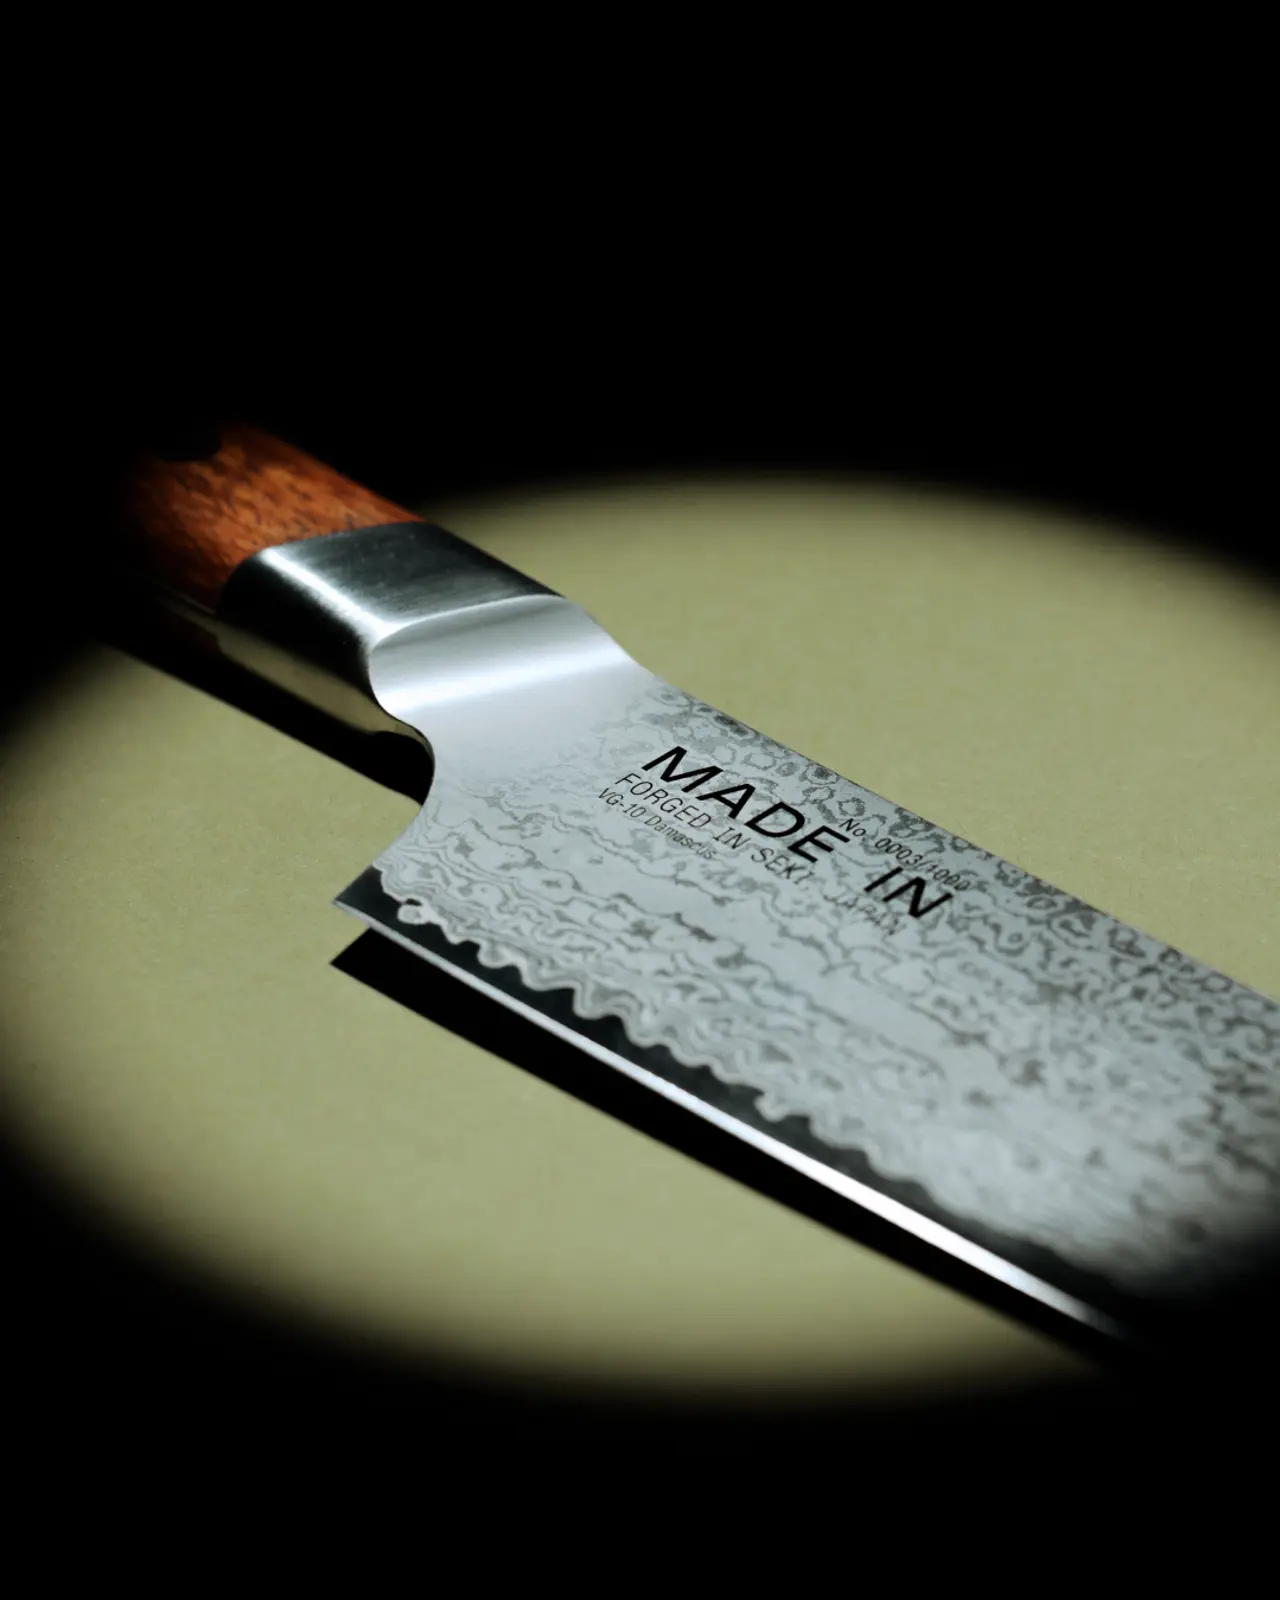 Close-up of a kitchen knife with a wooden handle and "MADE IN" text on the blade, spotlighted against a dark background.